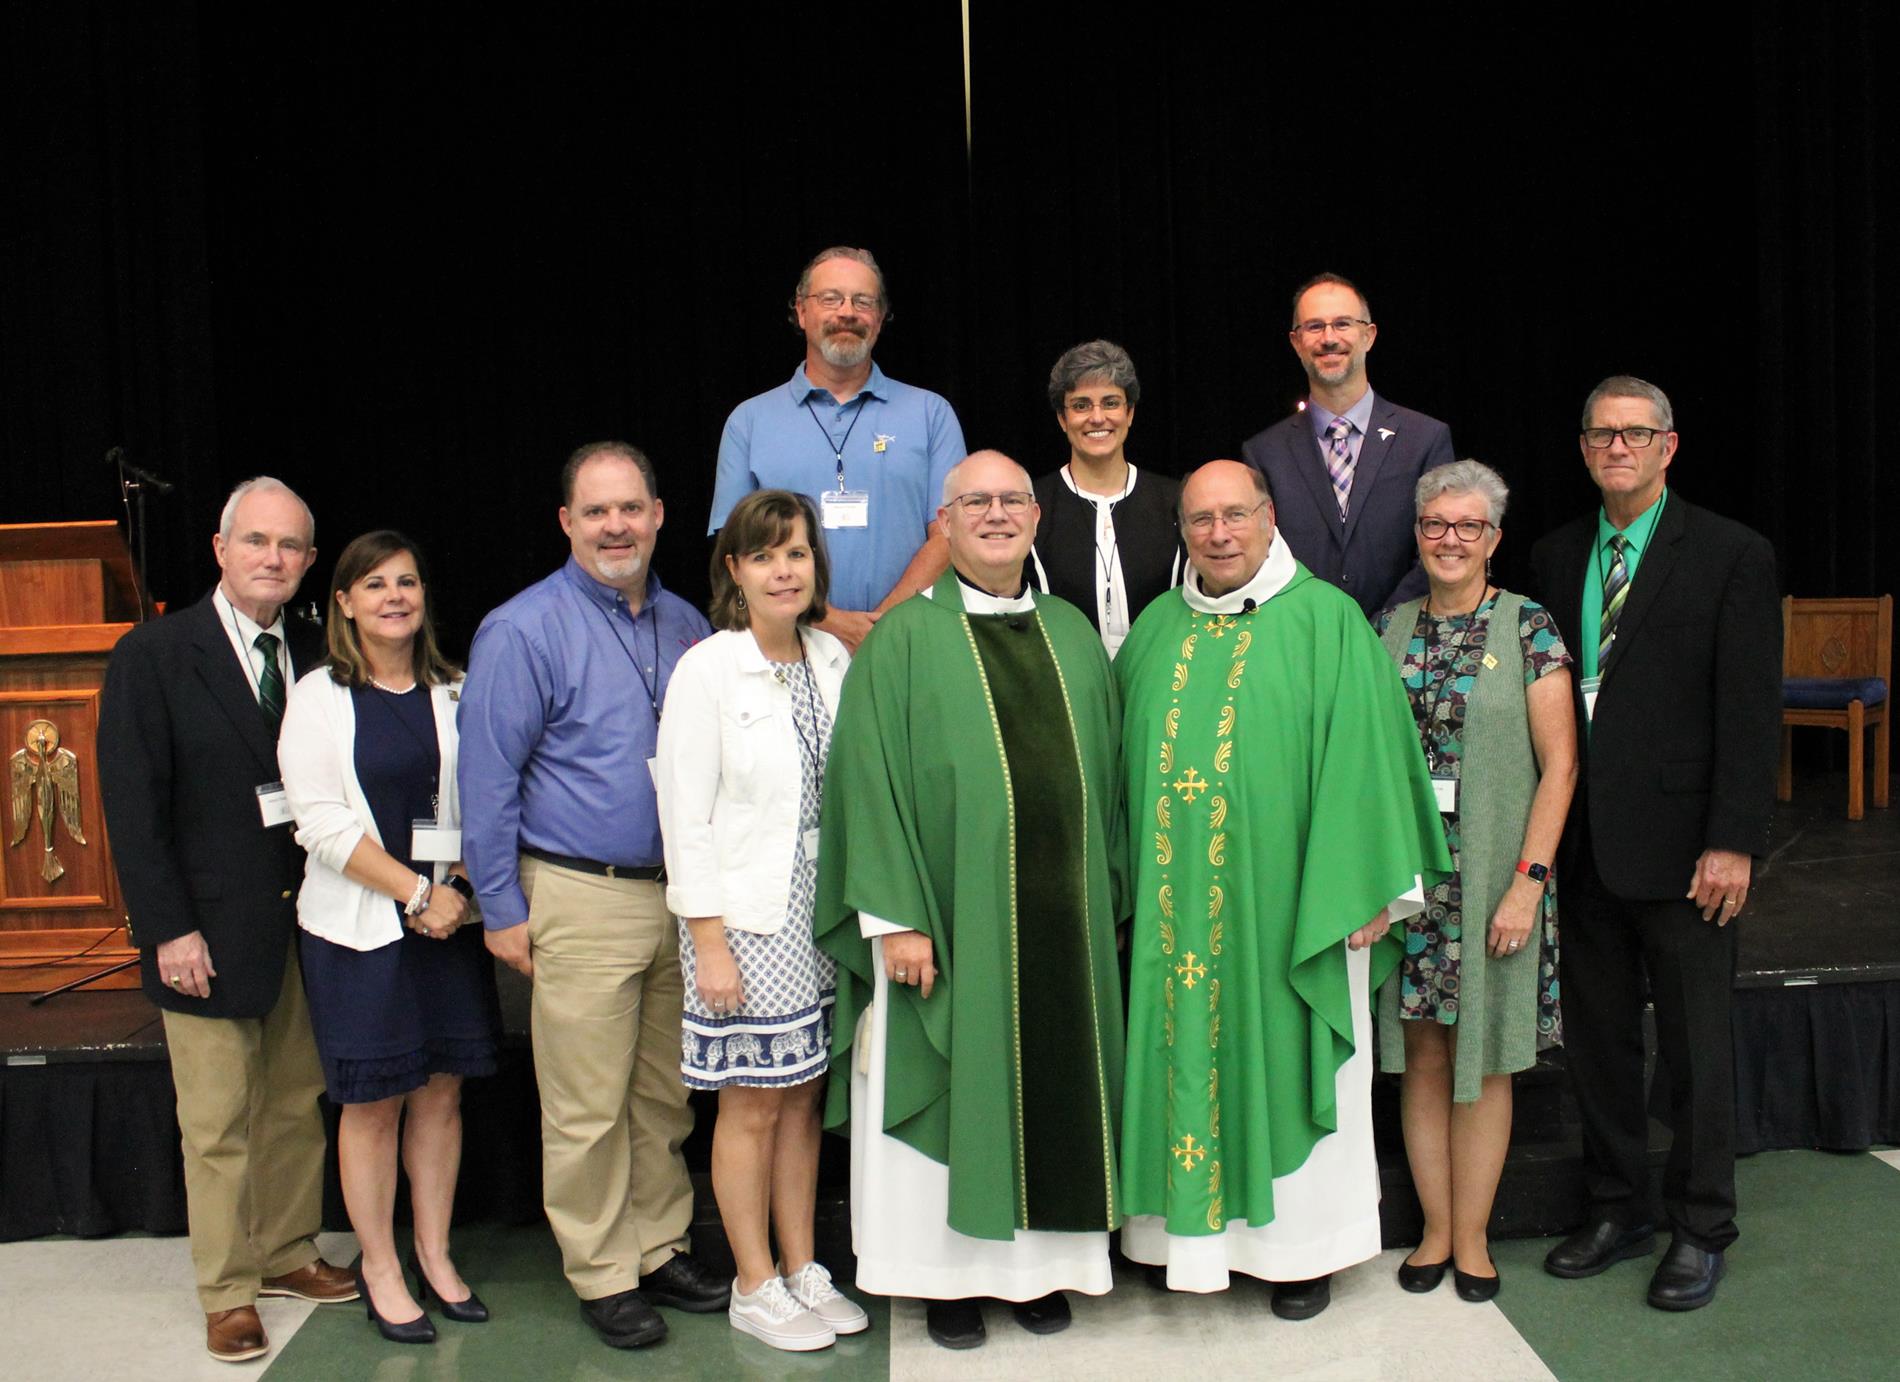 Benefactors Society Mass and Induction Ceremony - August 31, 2022